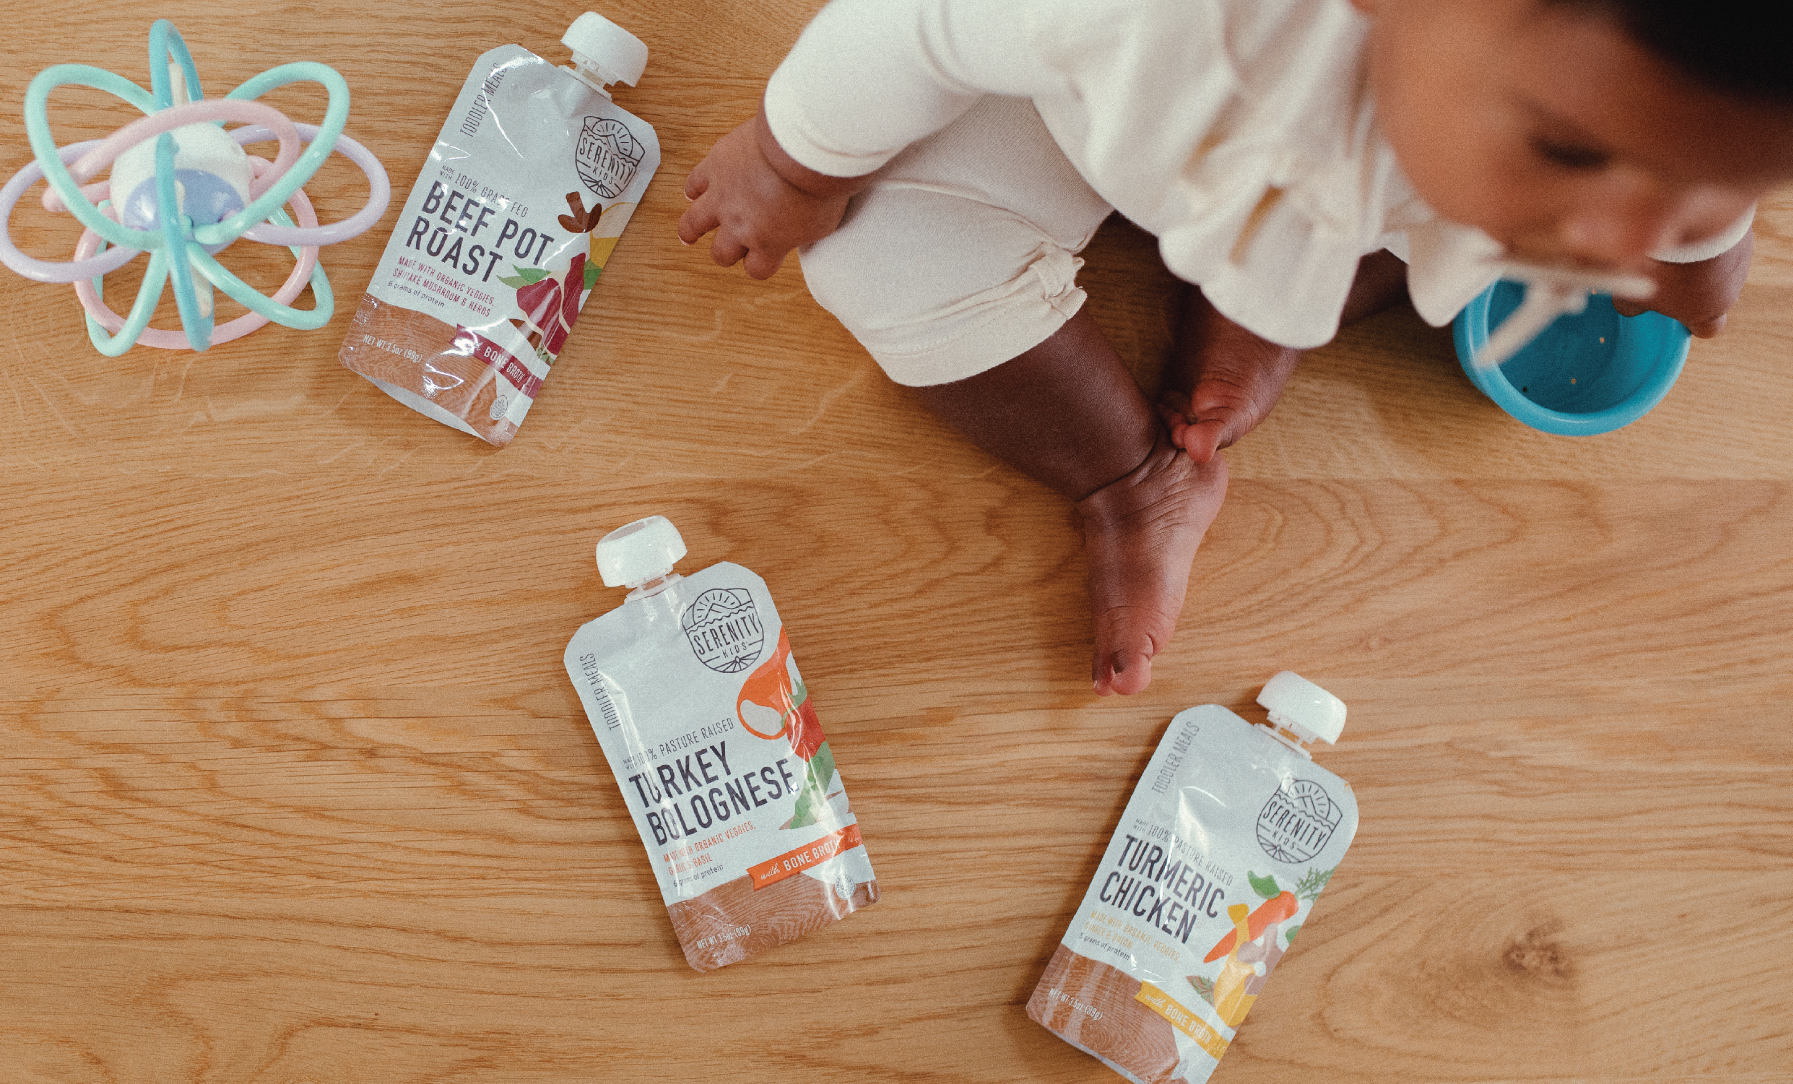 Serenity Kids Launches New Line of Toddler Purees with Bone Broth Nationwide